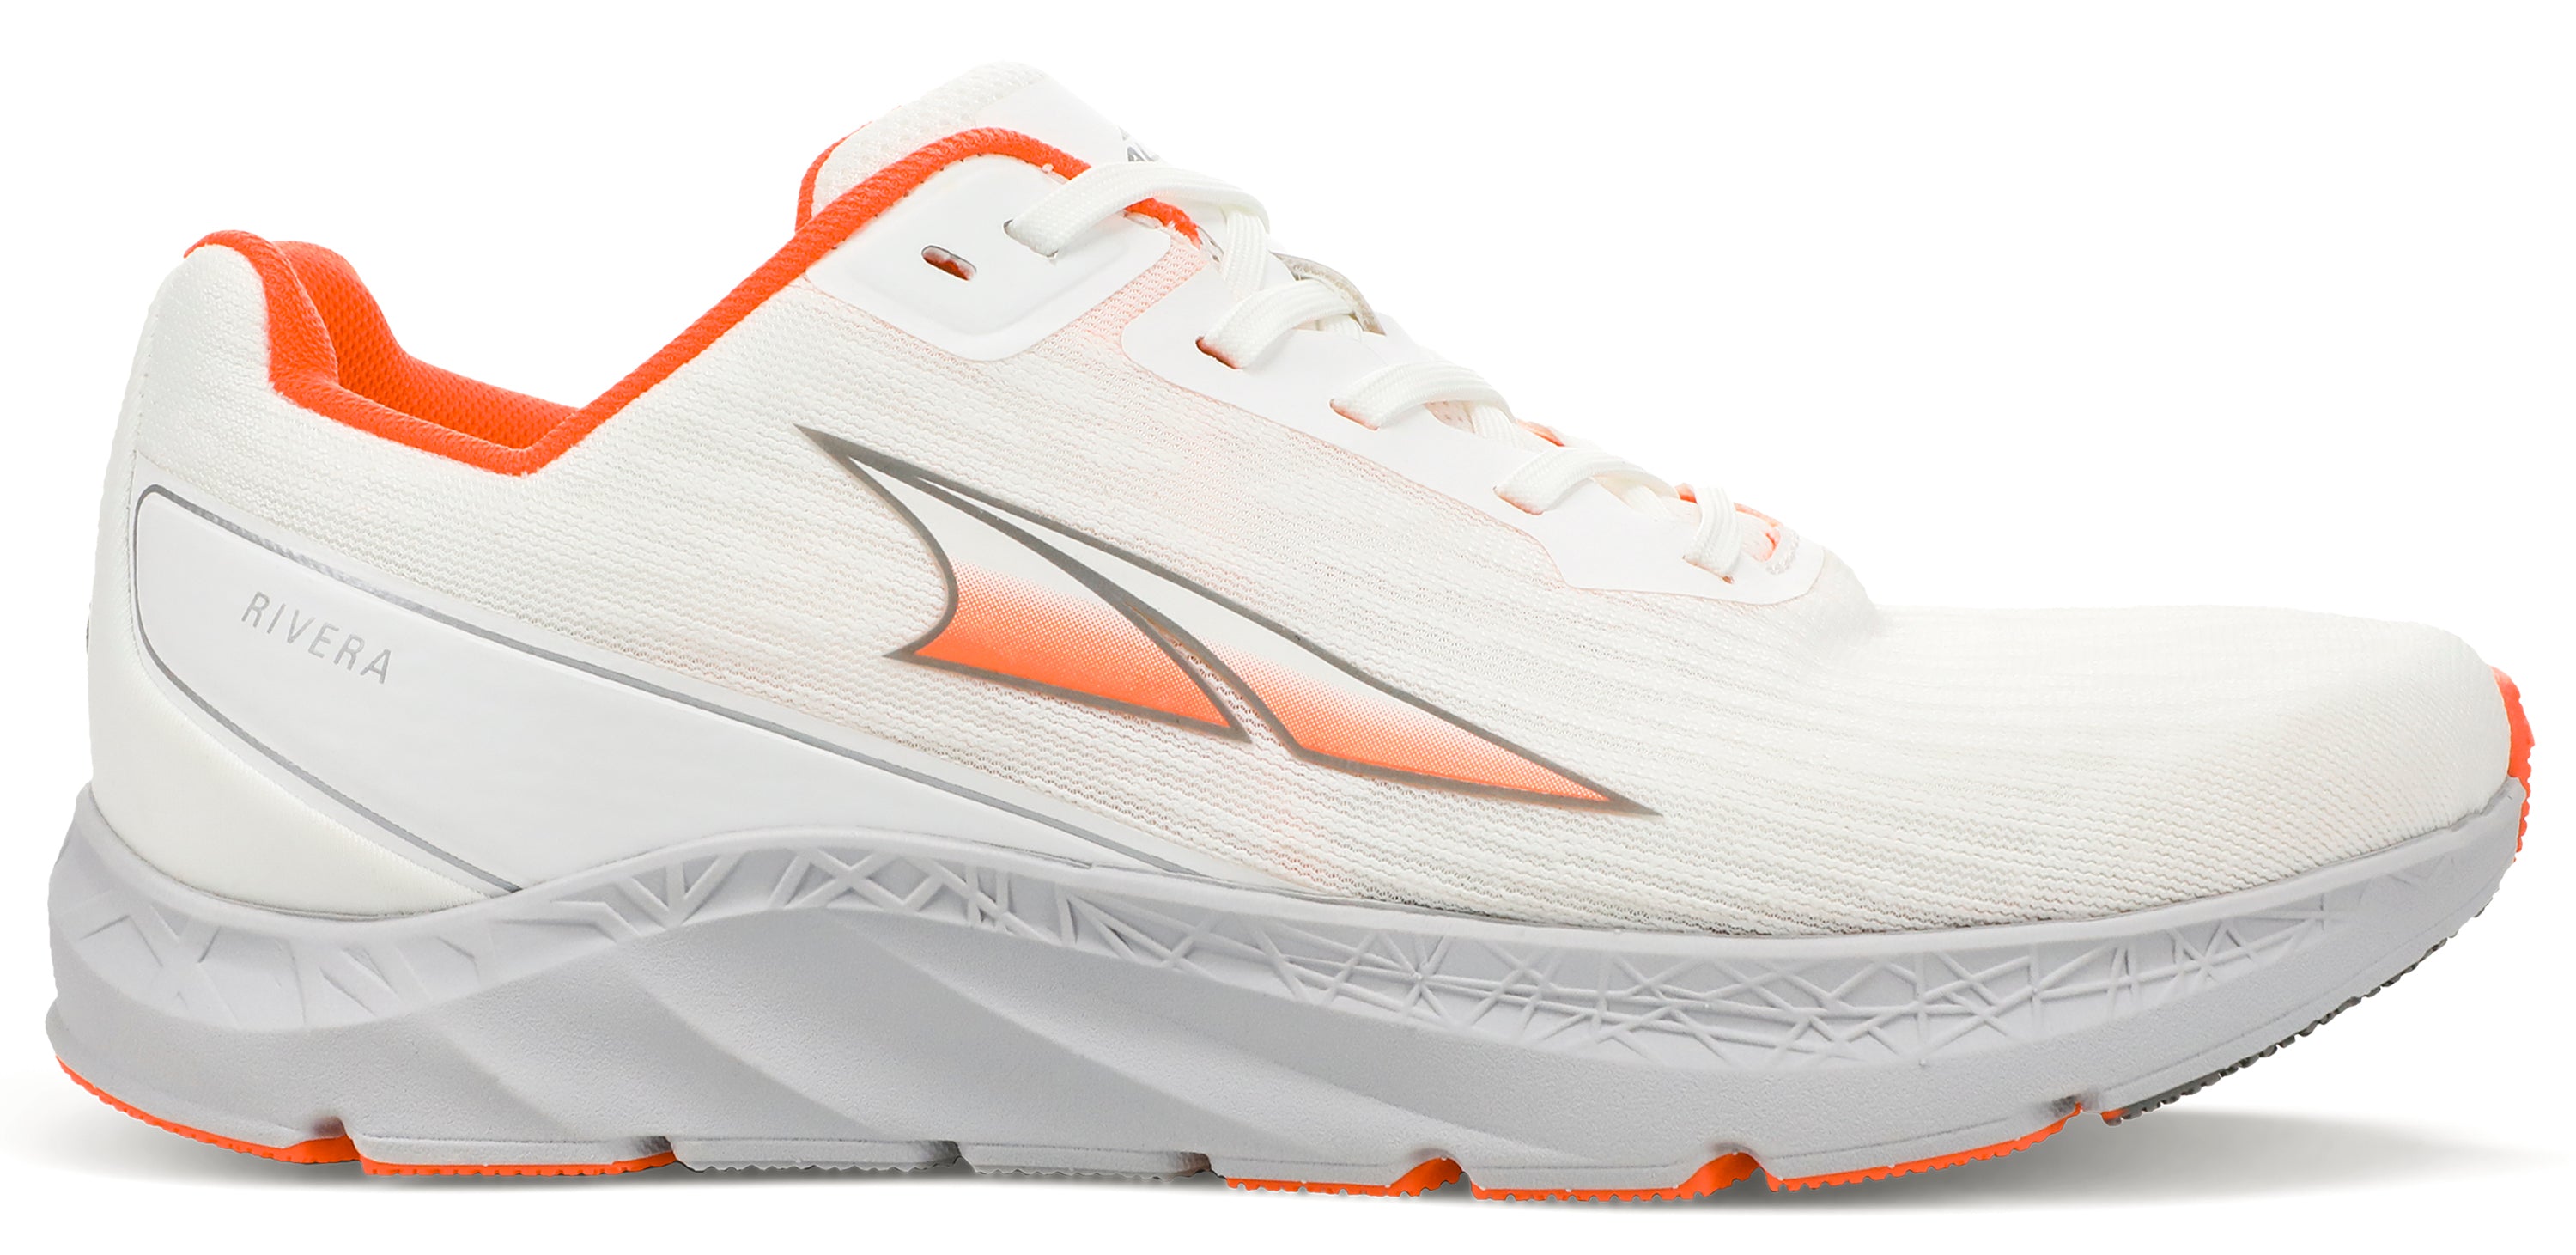 Altra Women's Rivera Road Running Shoe in White/Coral from the side